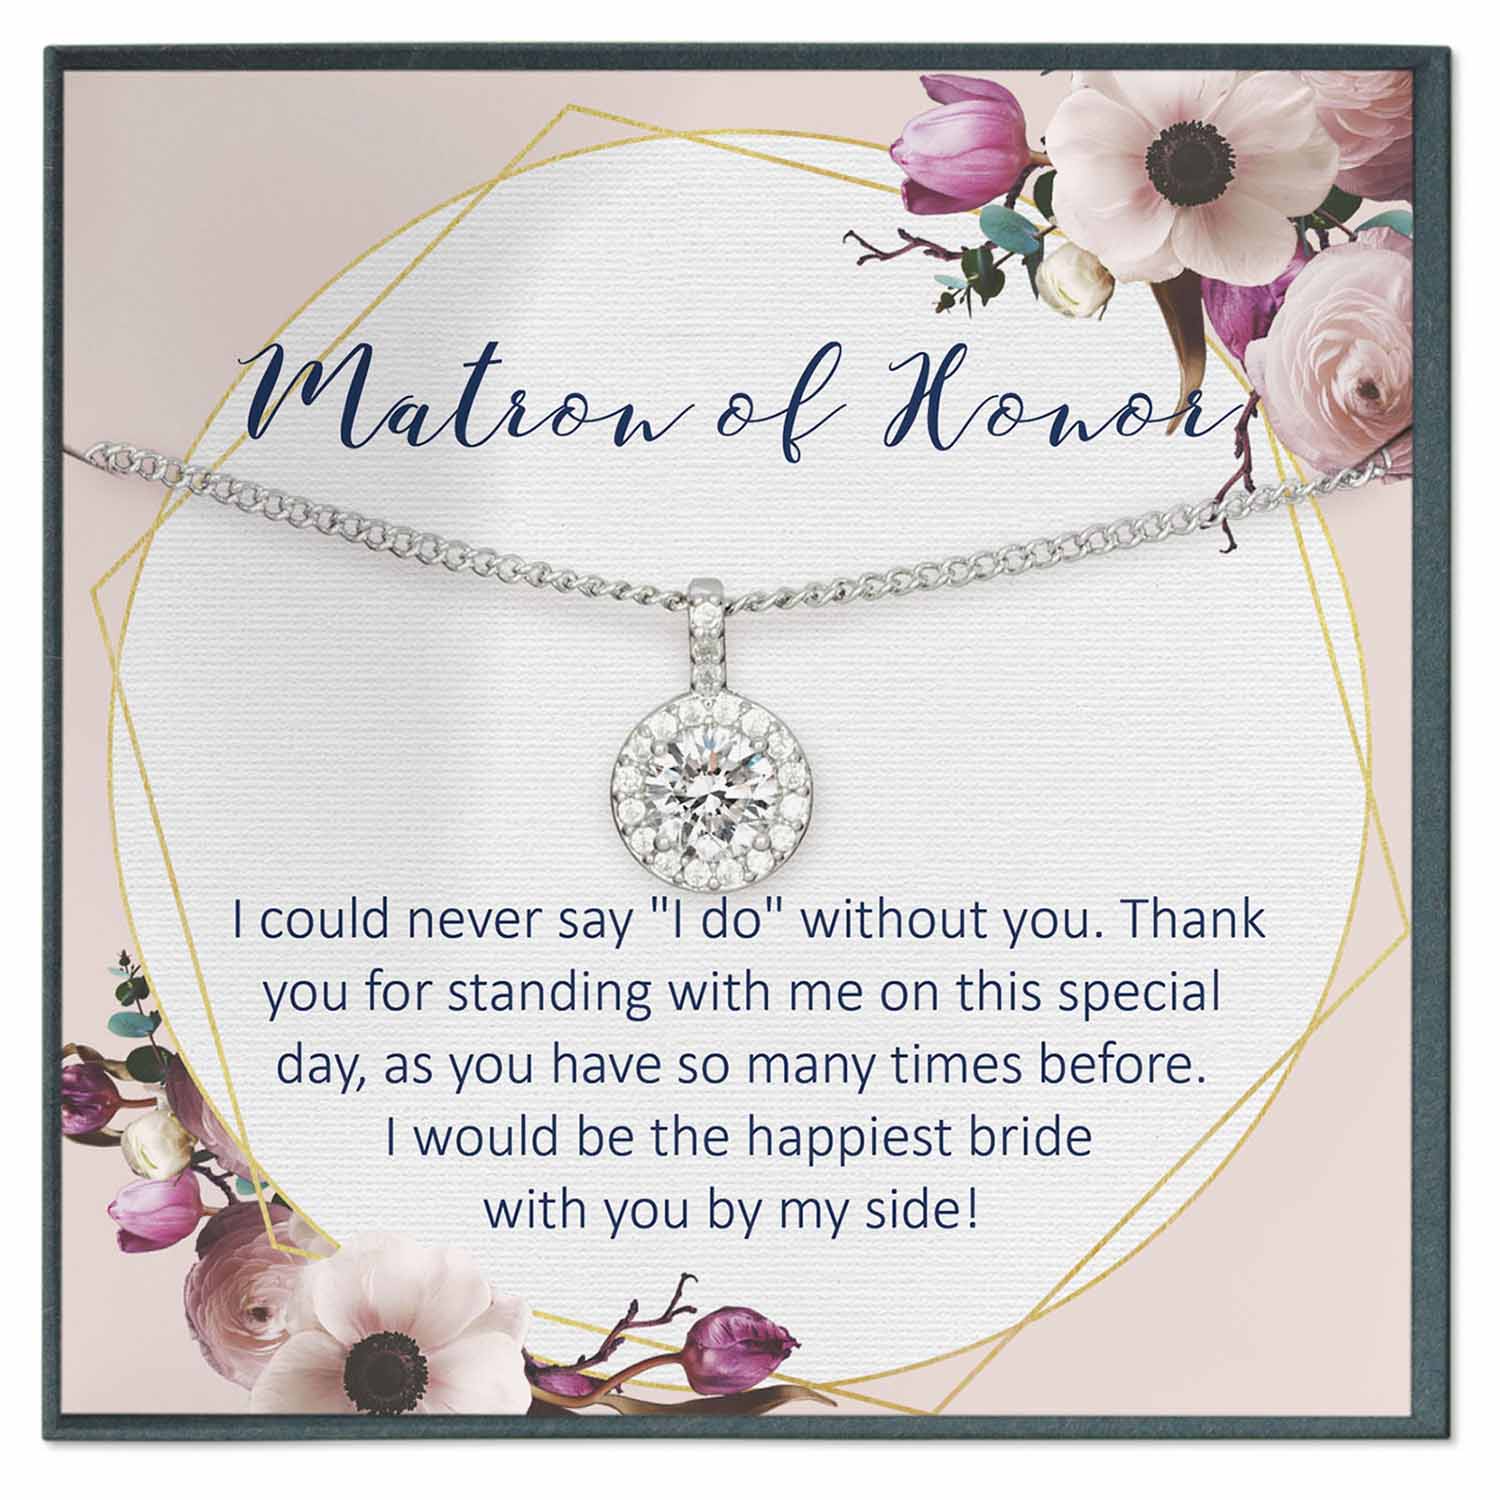 Matron of Honor Proposal Gift - Grace of Pearl